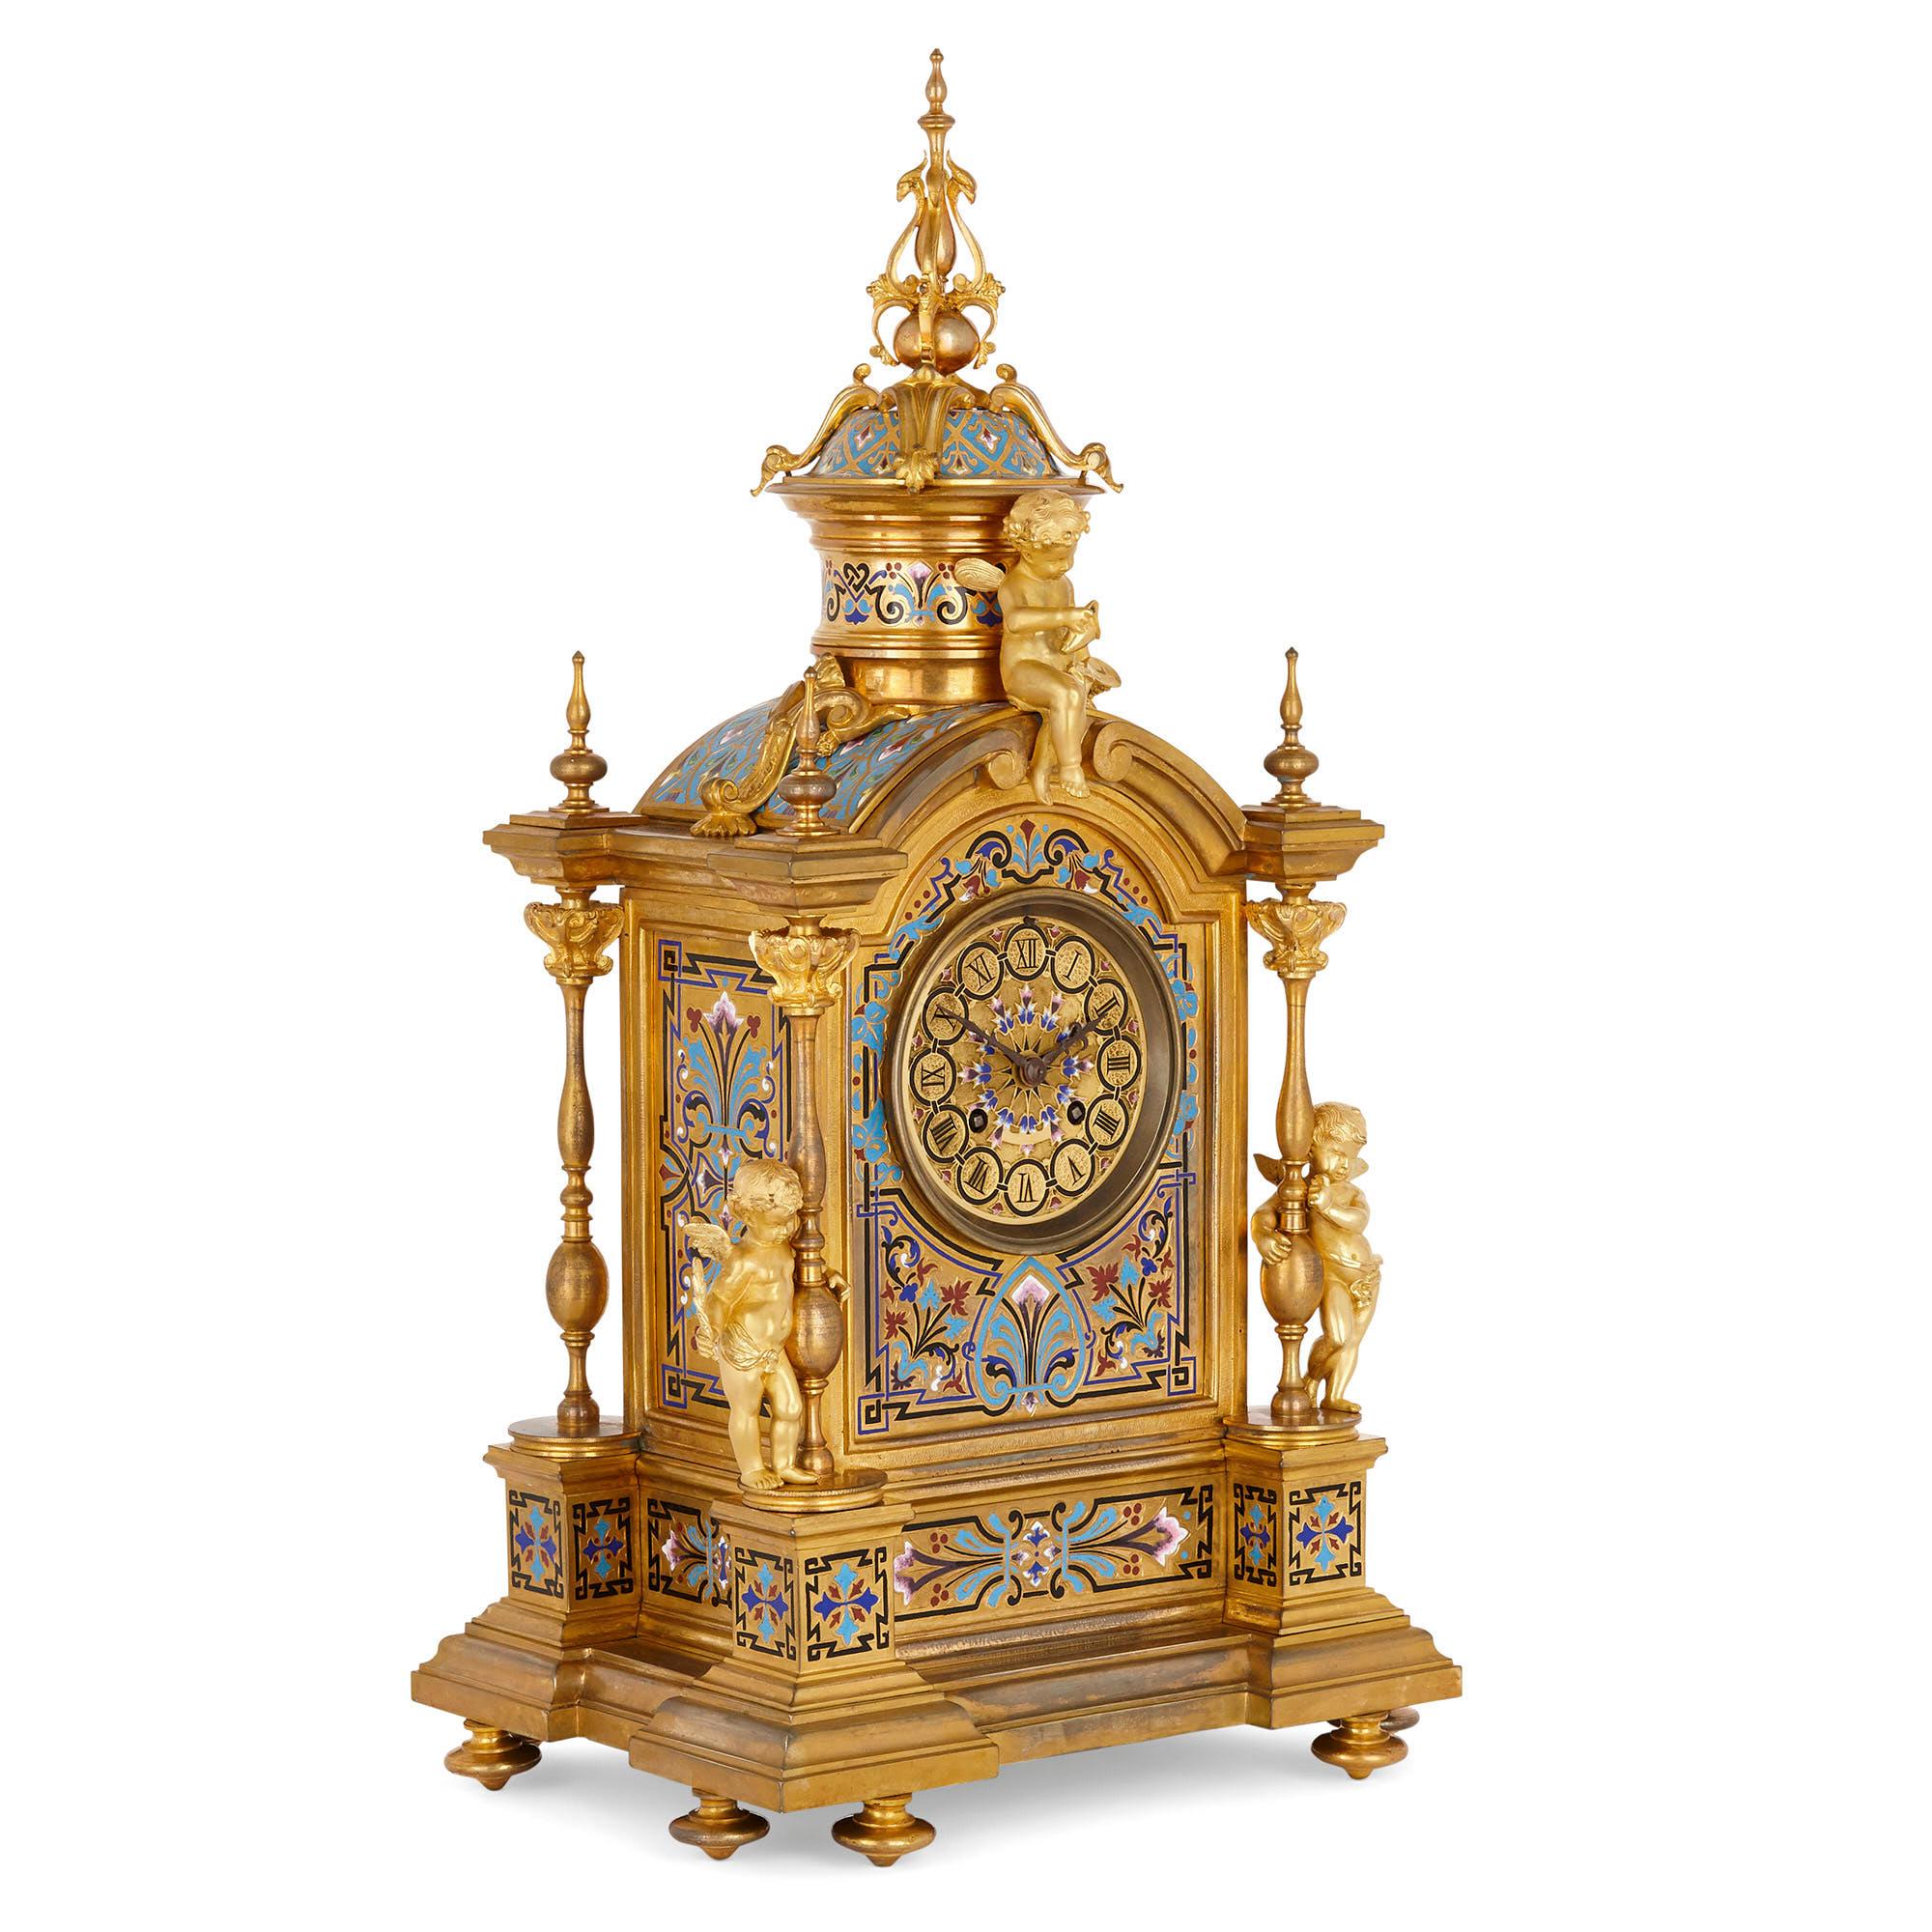 Renaissance Revival enamel and gilt bronze mantel clock
French, late 19th century
Size: Height 53cm, width 29cm, depth 22cm

The mantel clock is crafted in the charming Renaissance Revival style that flourished in the latter 19th century. The